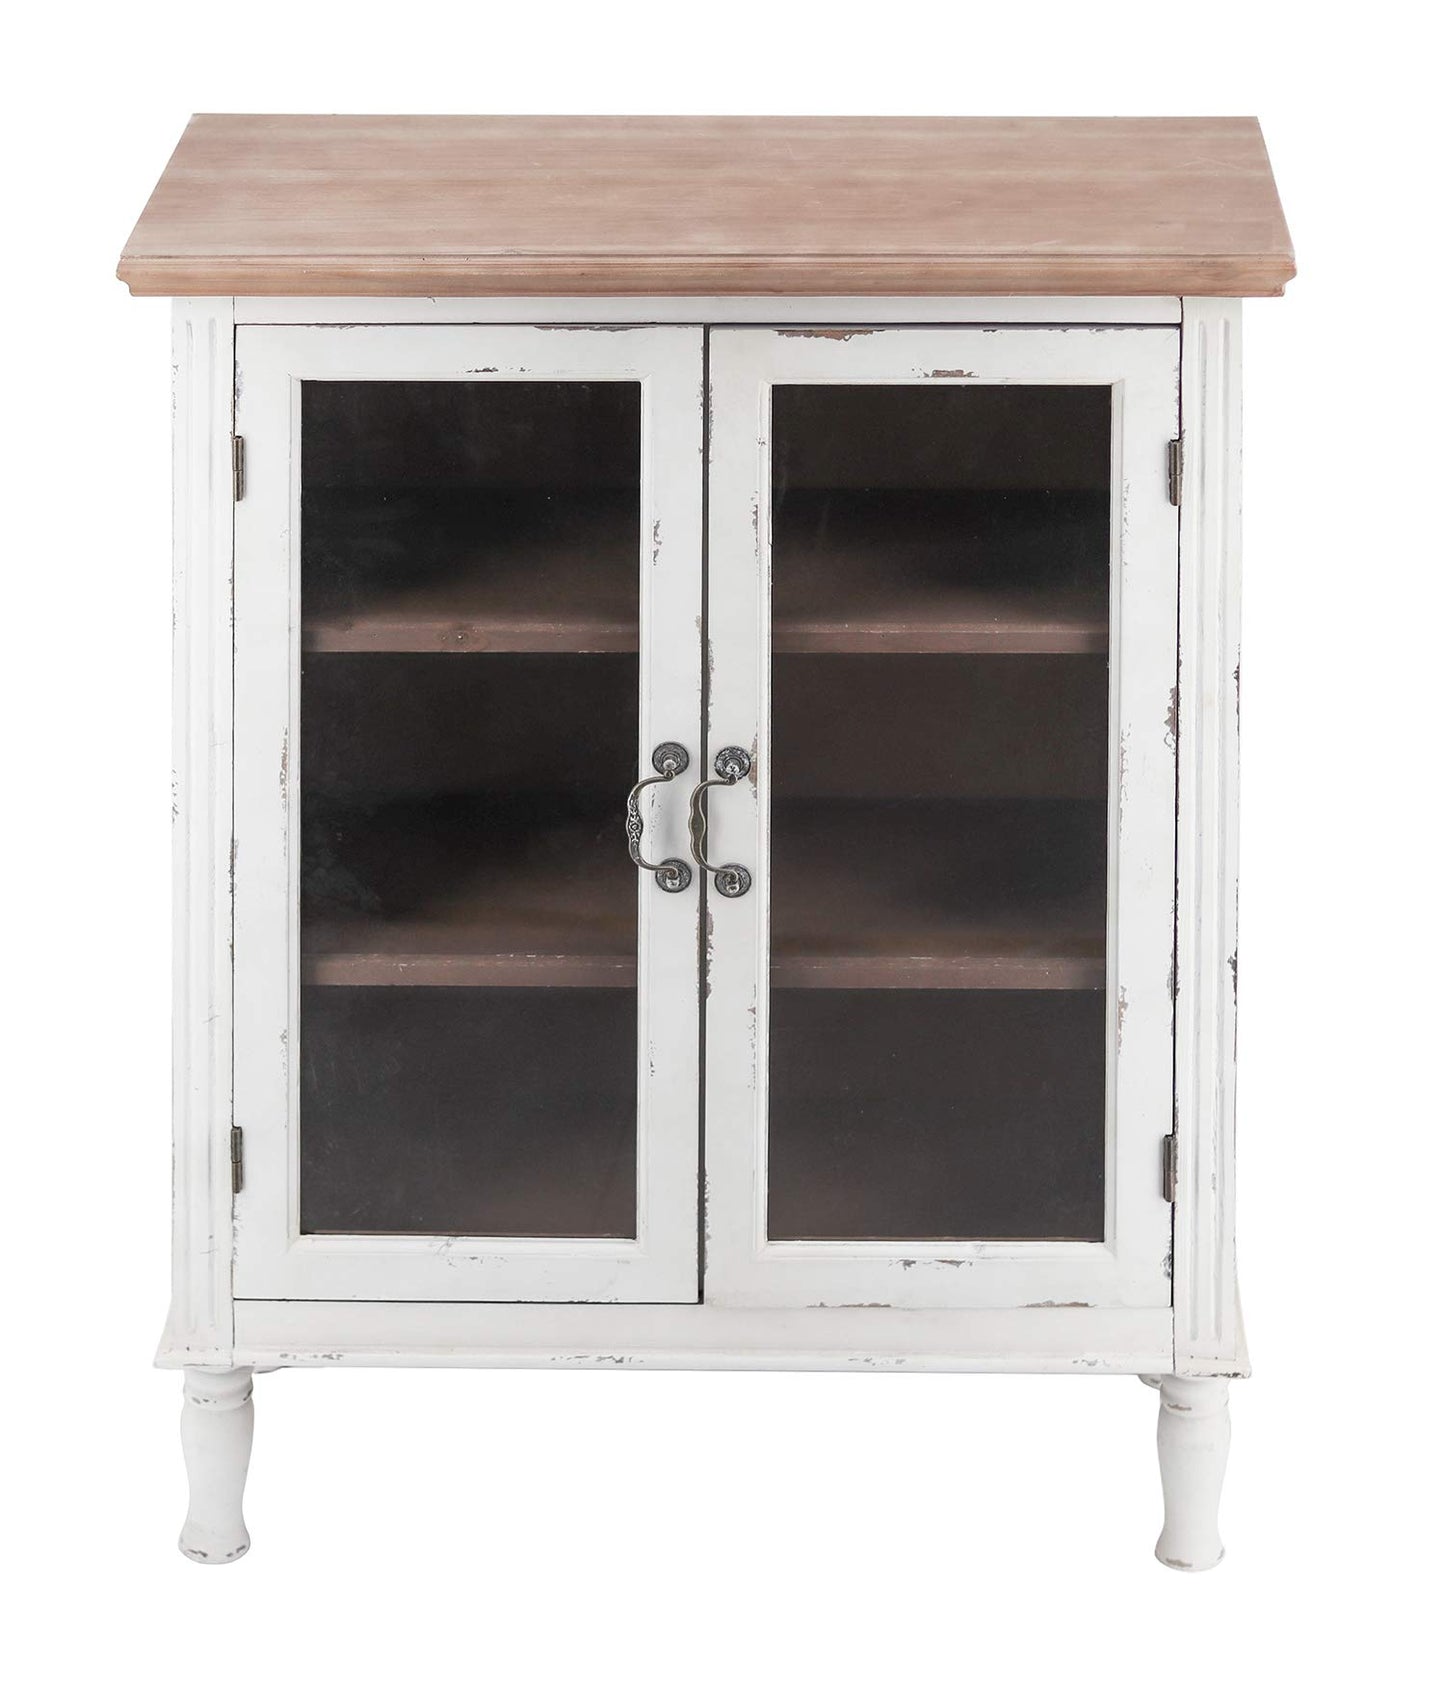 Farmhouse Wood Cabinet with 2 Glass Doors and 3 Shelves, Distressed White and Natural Wood Storage Cabinet for Kitchen, Dinning room, Bathroom,